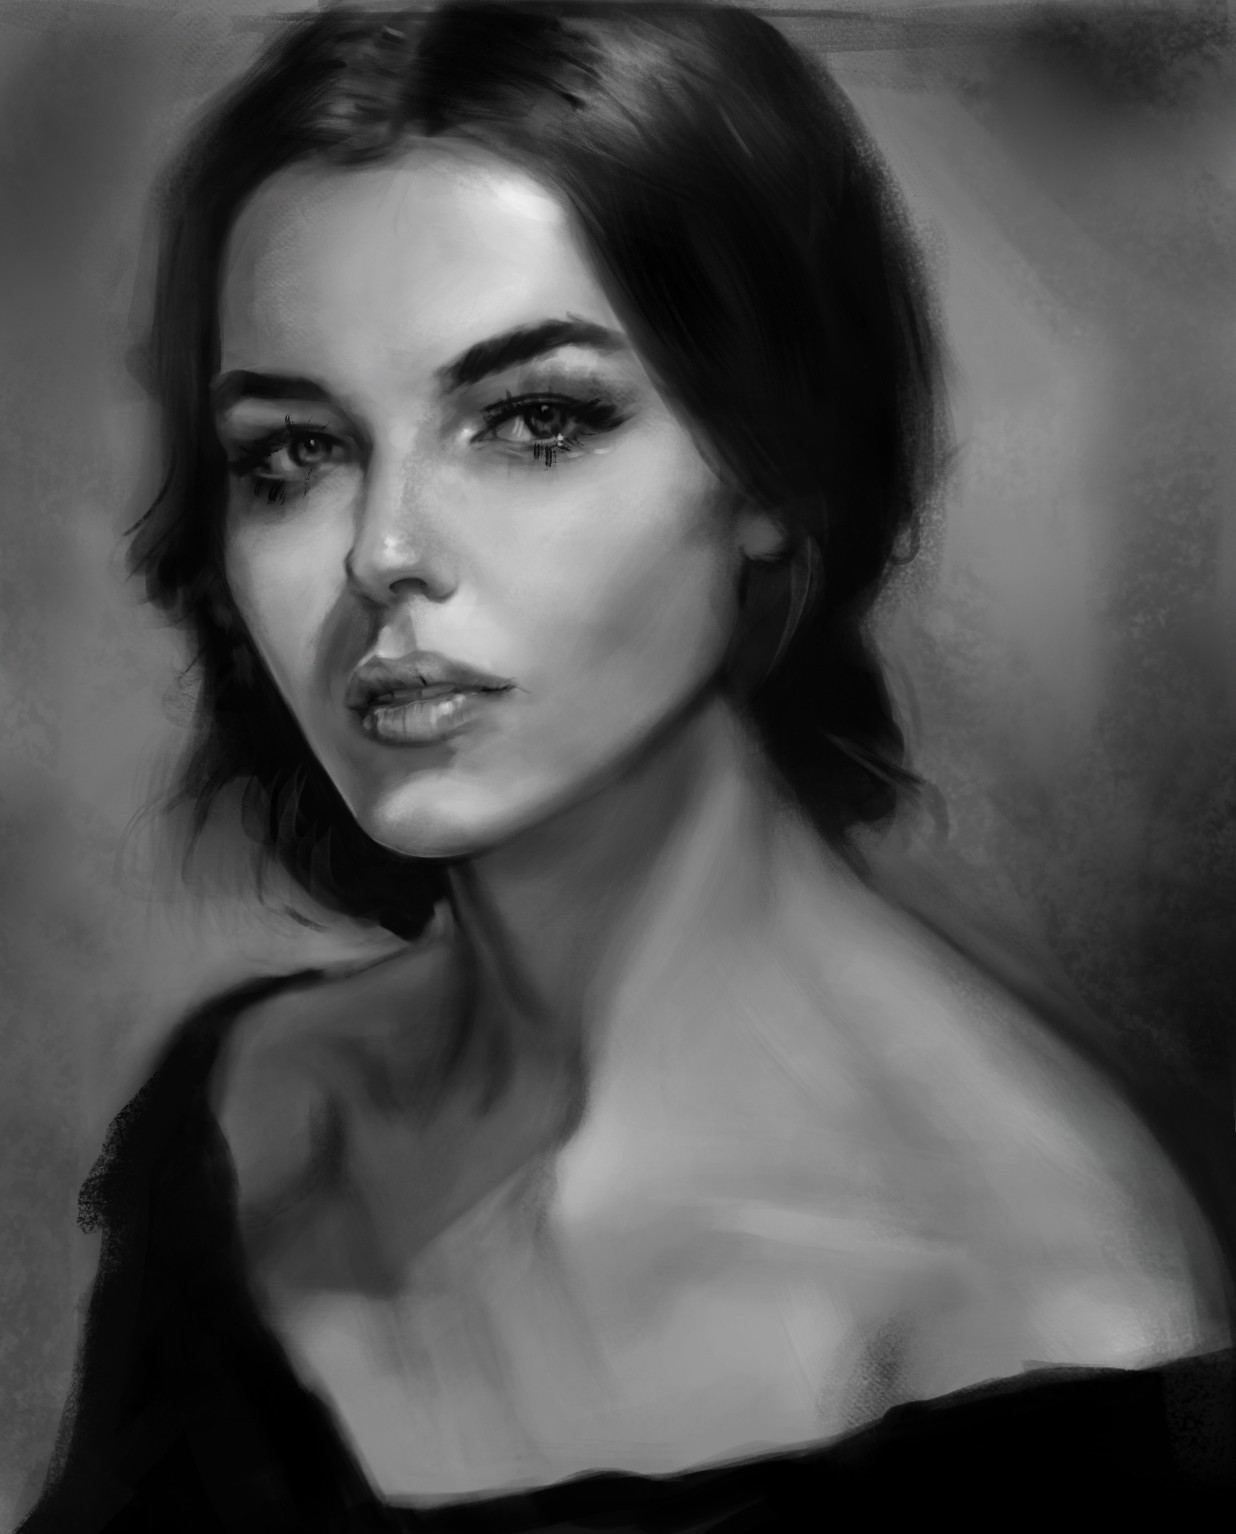 ArtStation - Light and form study from photo